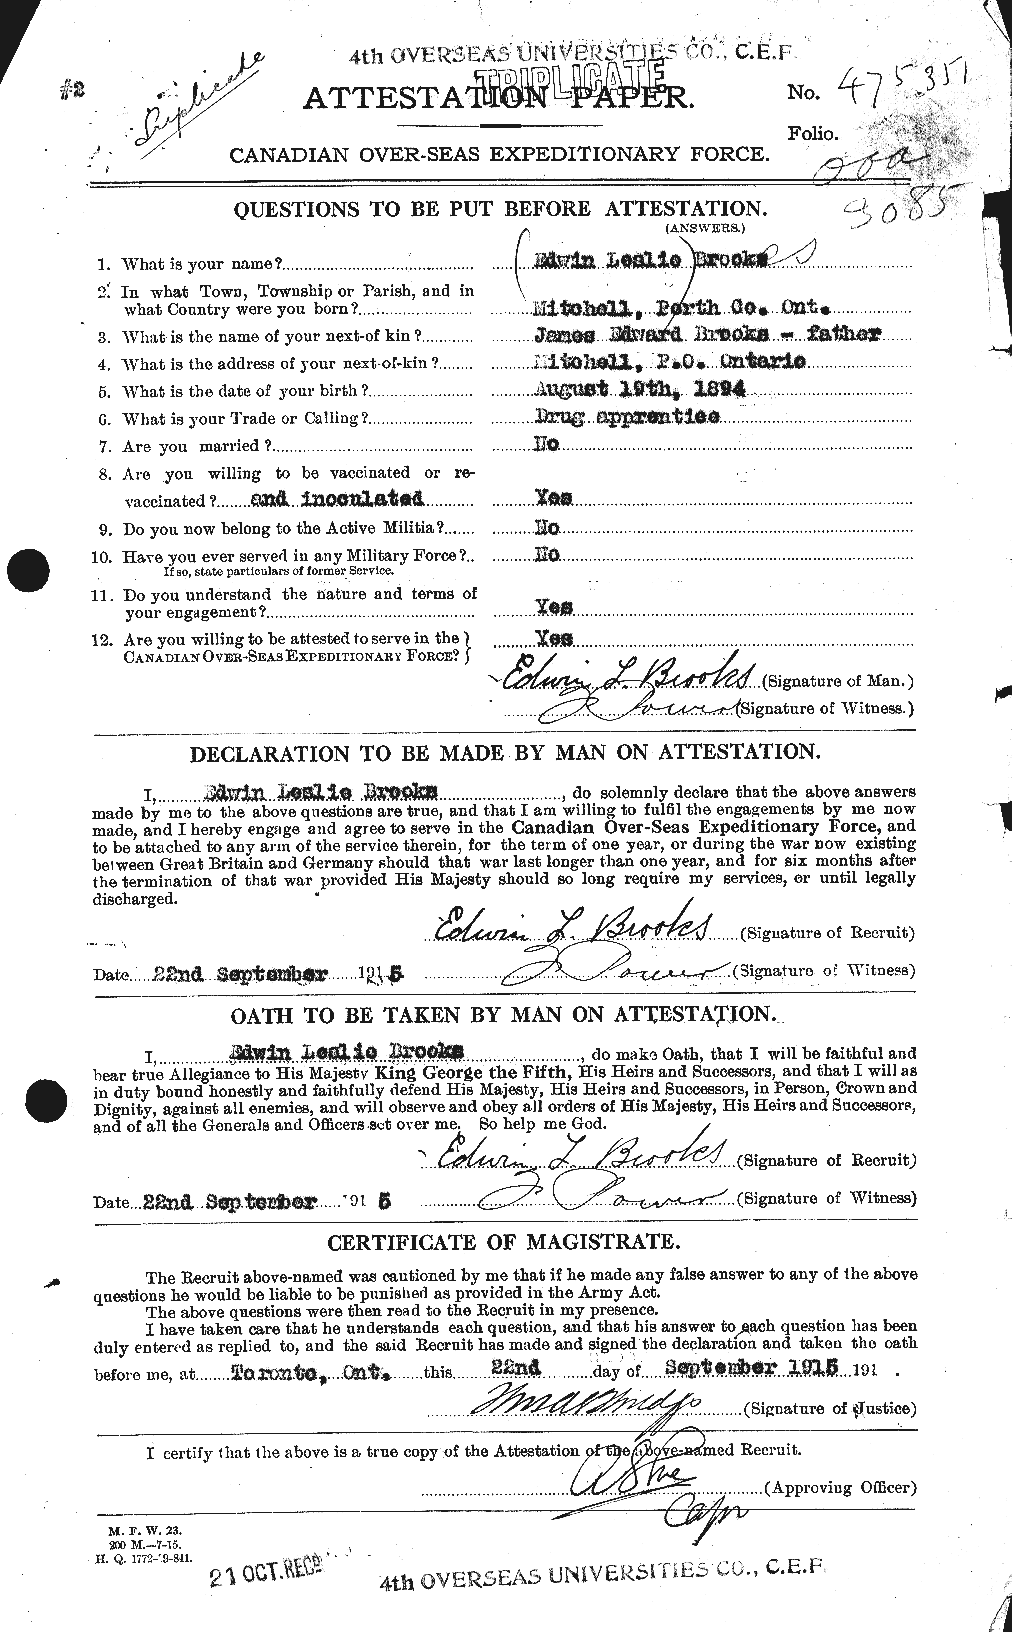 Personnel Records of the First World War - CEF 261582a